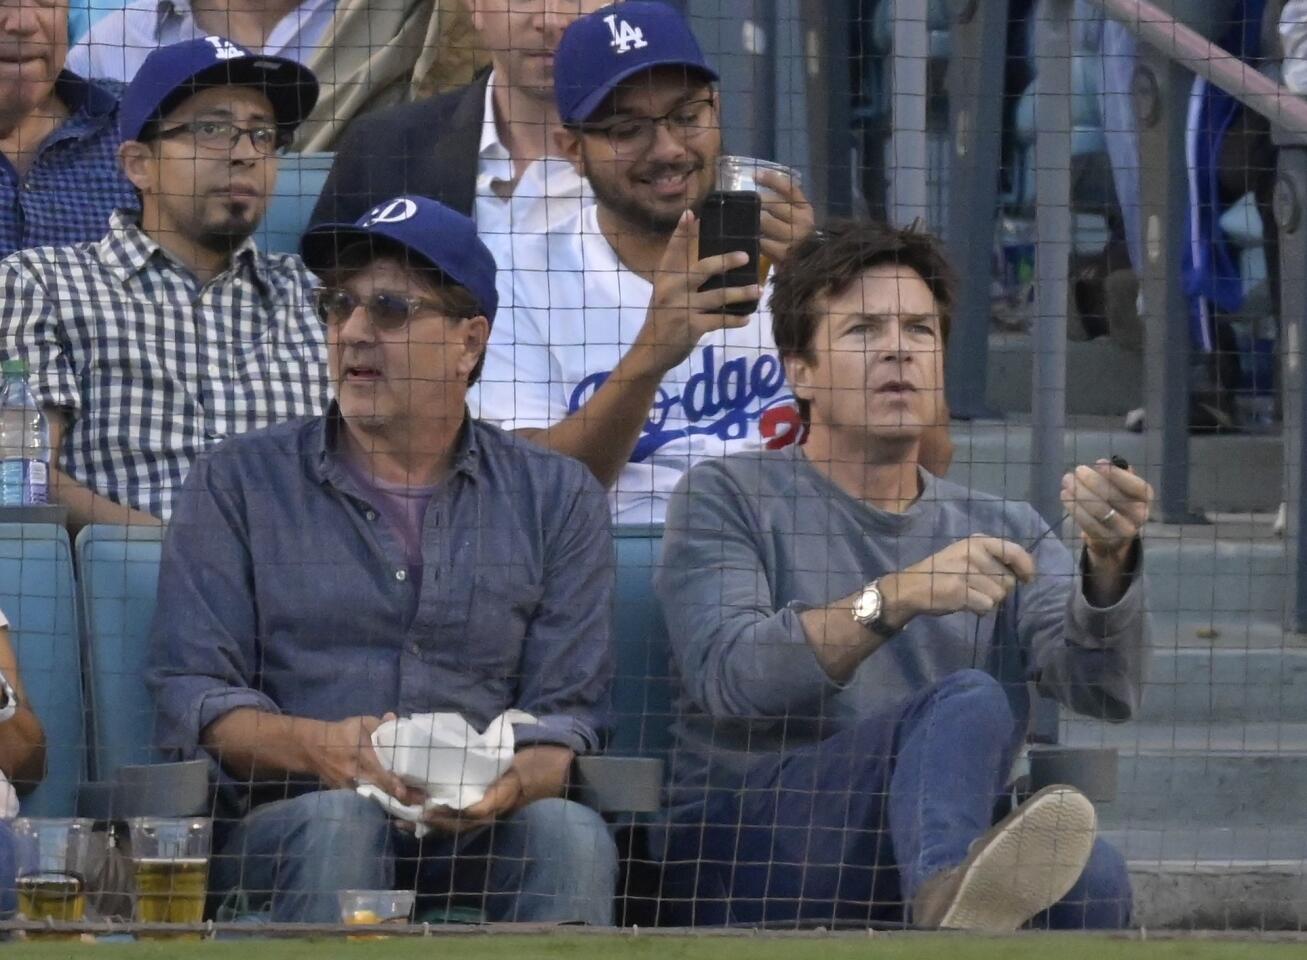 Actor Jason Bateman watches during the third inning of Game 3 of the National League Championship Series baseball game between the Milwaukee Brewers and the Los Angeles Dodgers Monday, Oct. 15, 2018, in Los Angeles. (AP Photo/Mark J. Terrill)